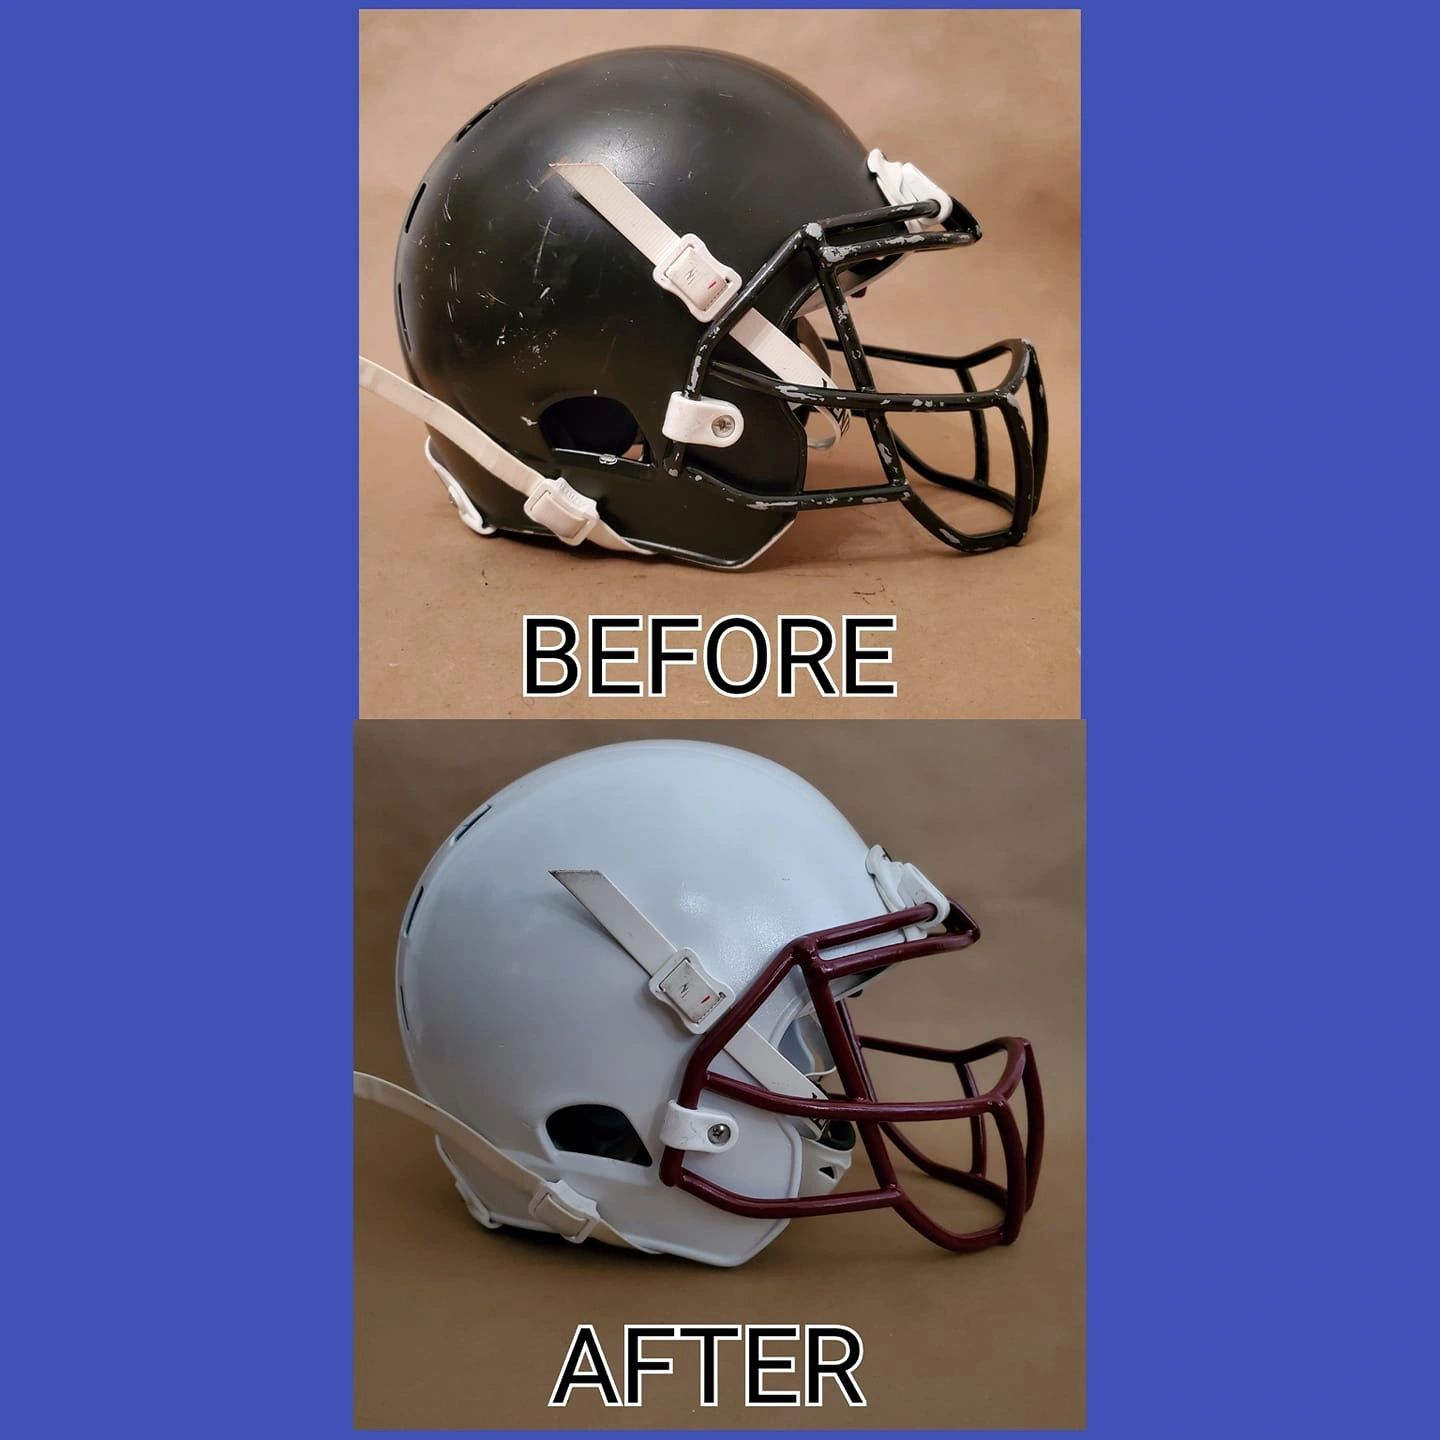 before and after helmet pictures